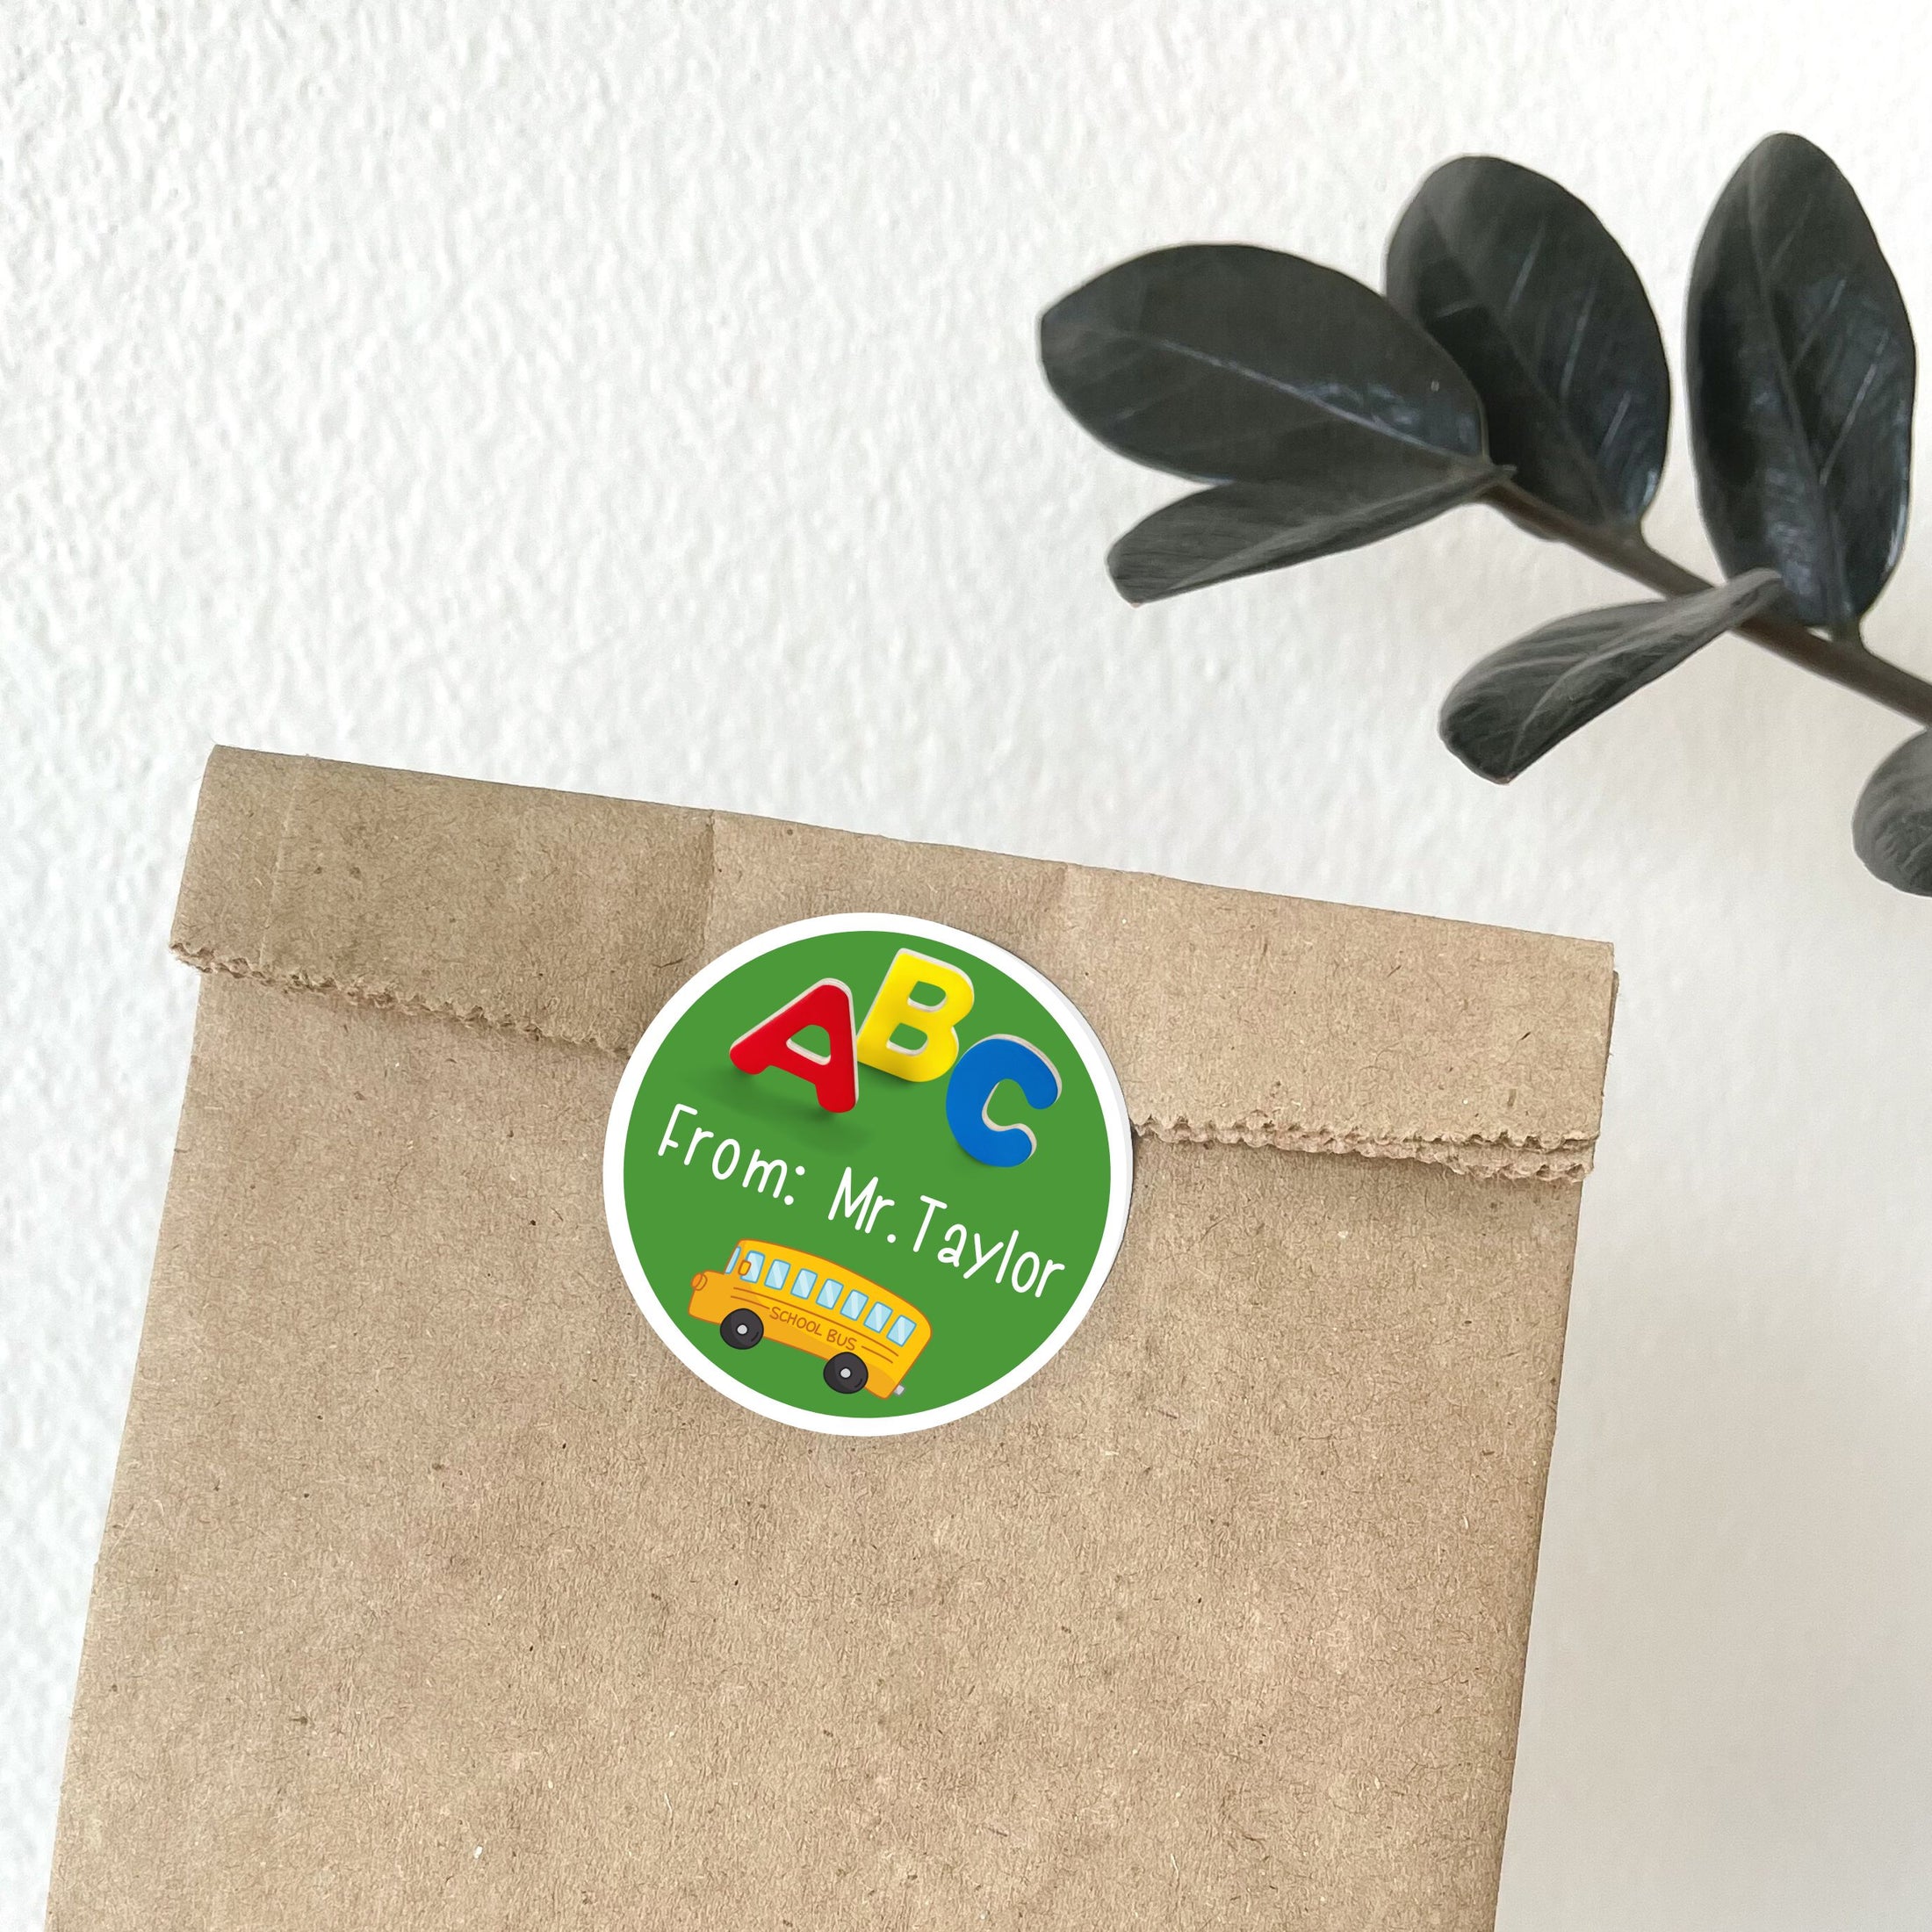 This image shows the personalized school sticker on a paper bag.